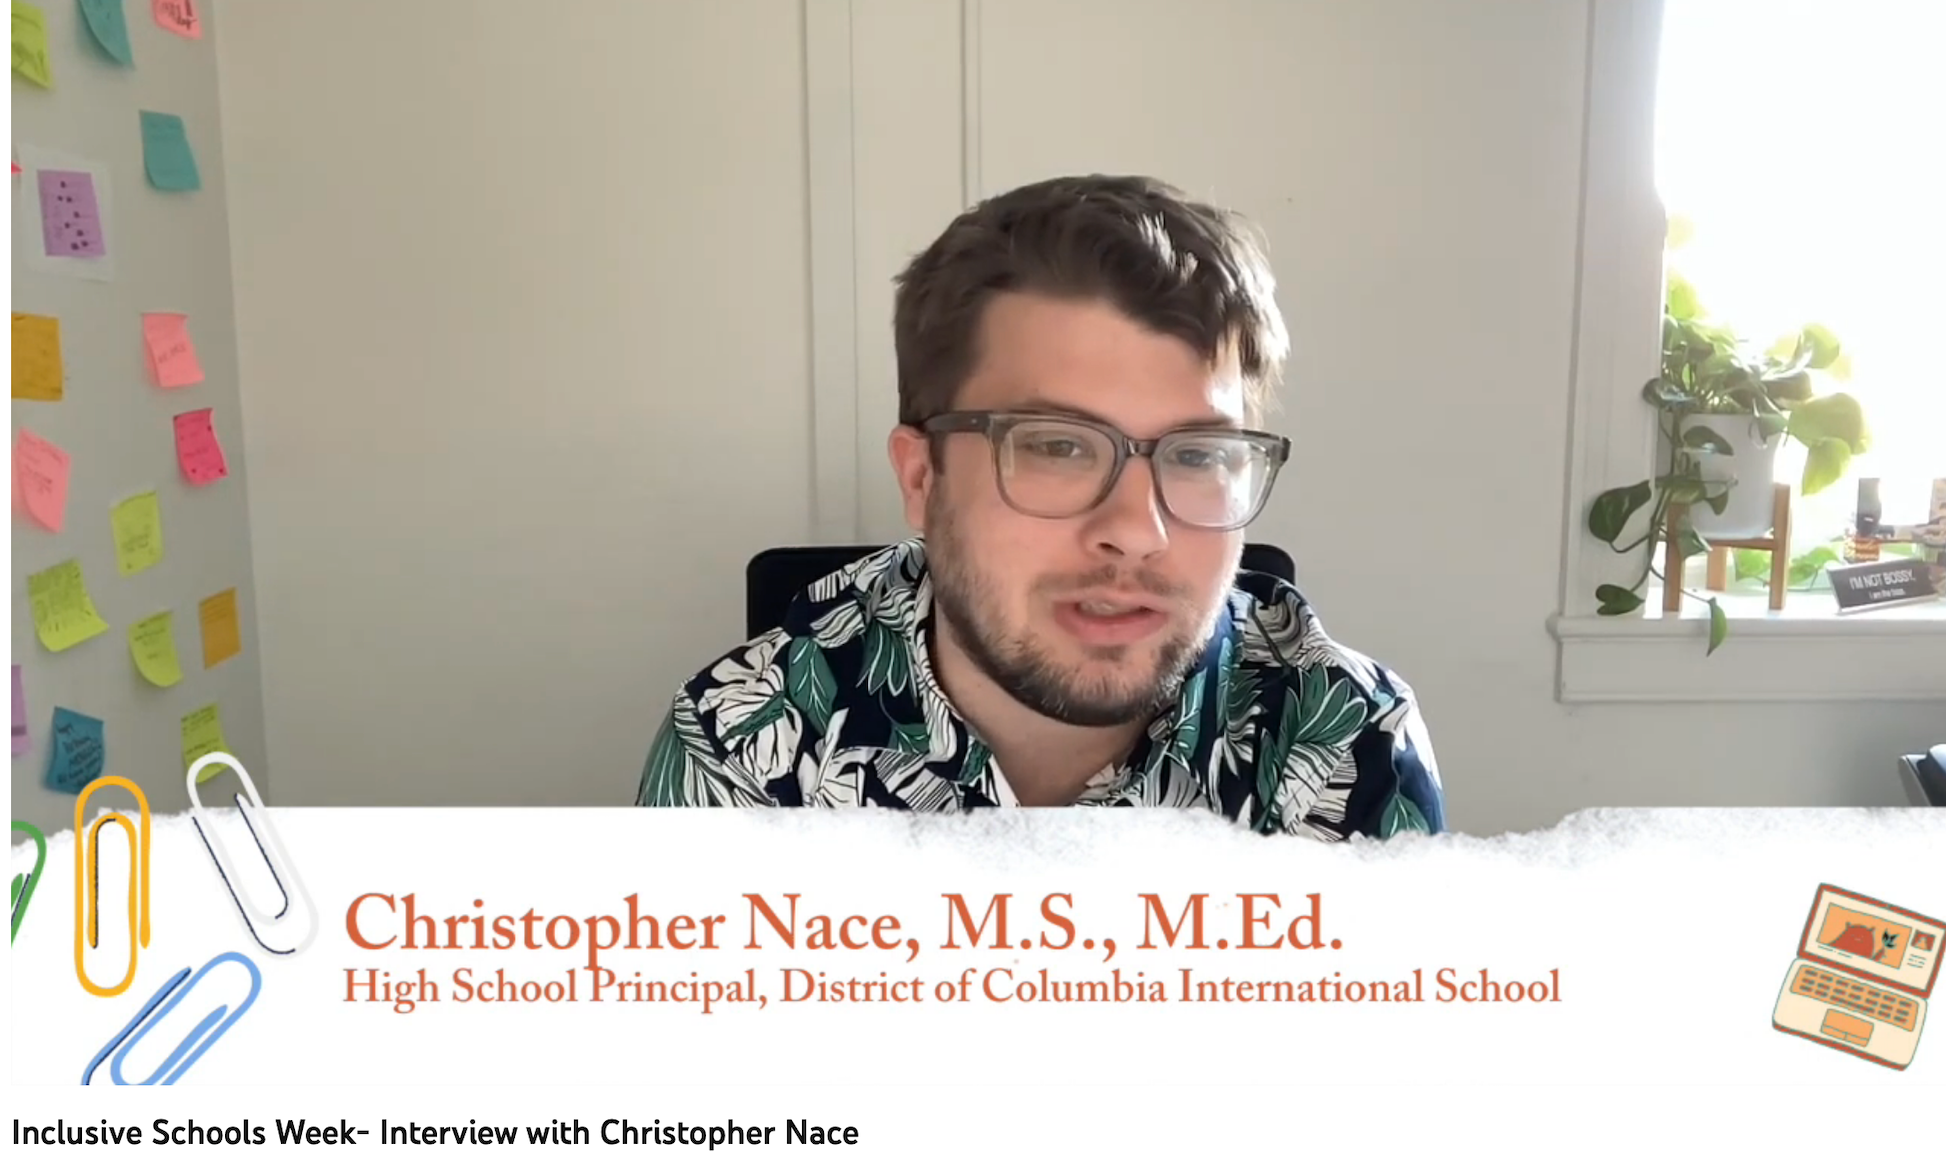 Inclusive Schools Week- Interview with Christopher Nace